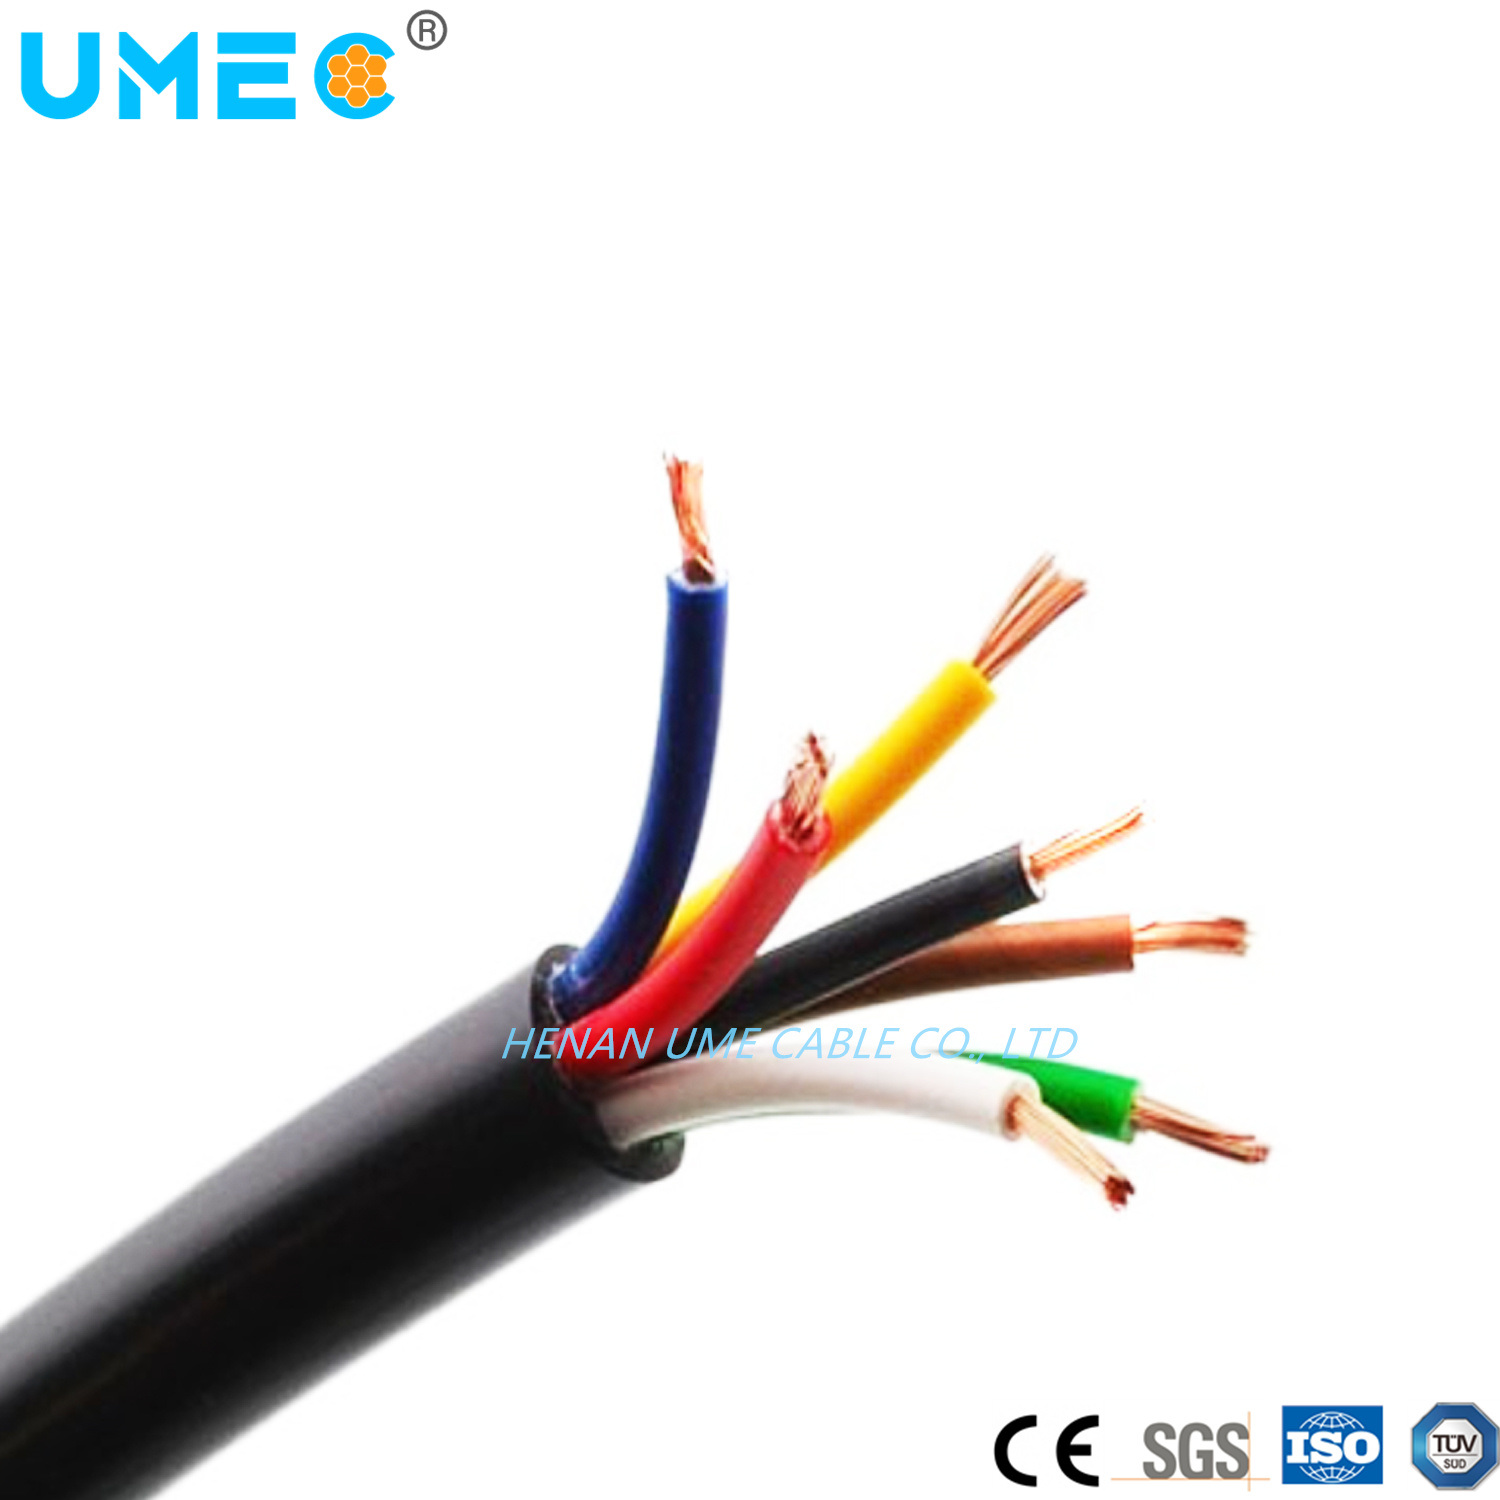 China Electrical H07rn-F H05rn-F 4gx1.5mm 2.5mm Flat and Round Soft Rubber Submersible Pump Cable